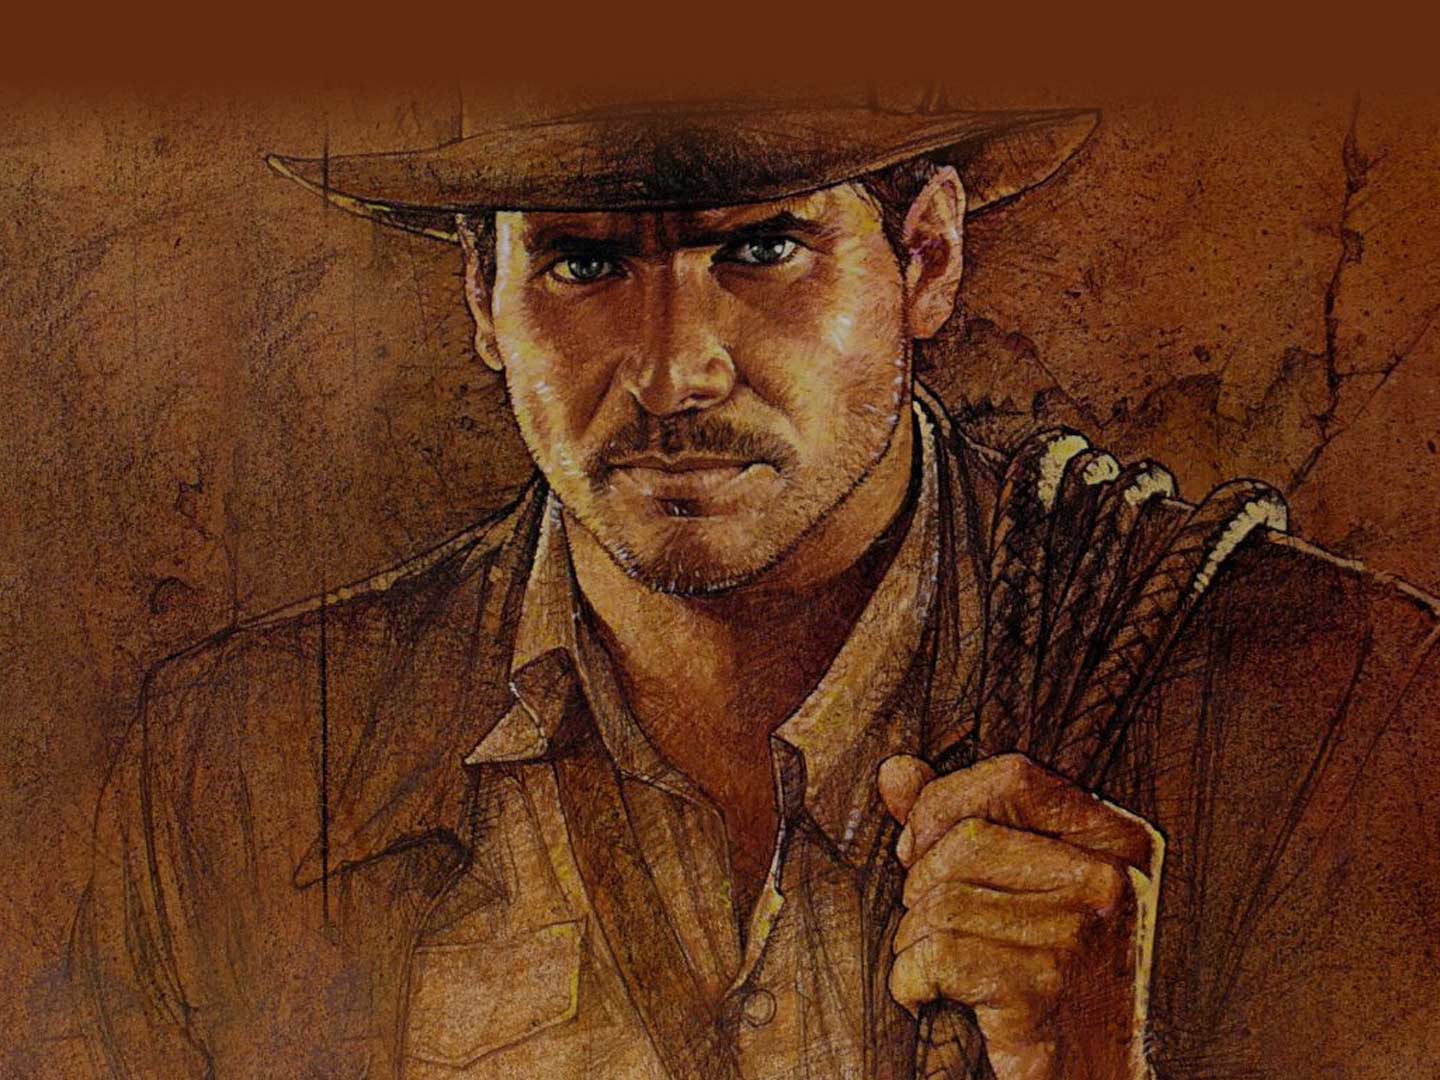 Throwback Thursday: Indiana Jones & the Raiders of the Lost Ark